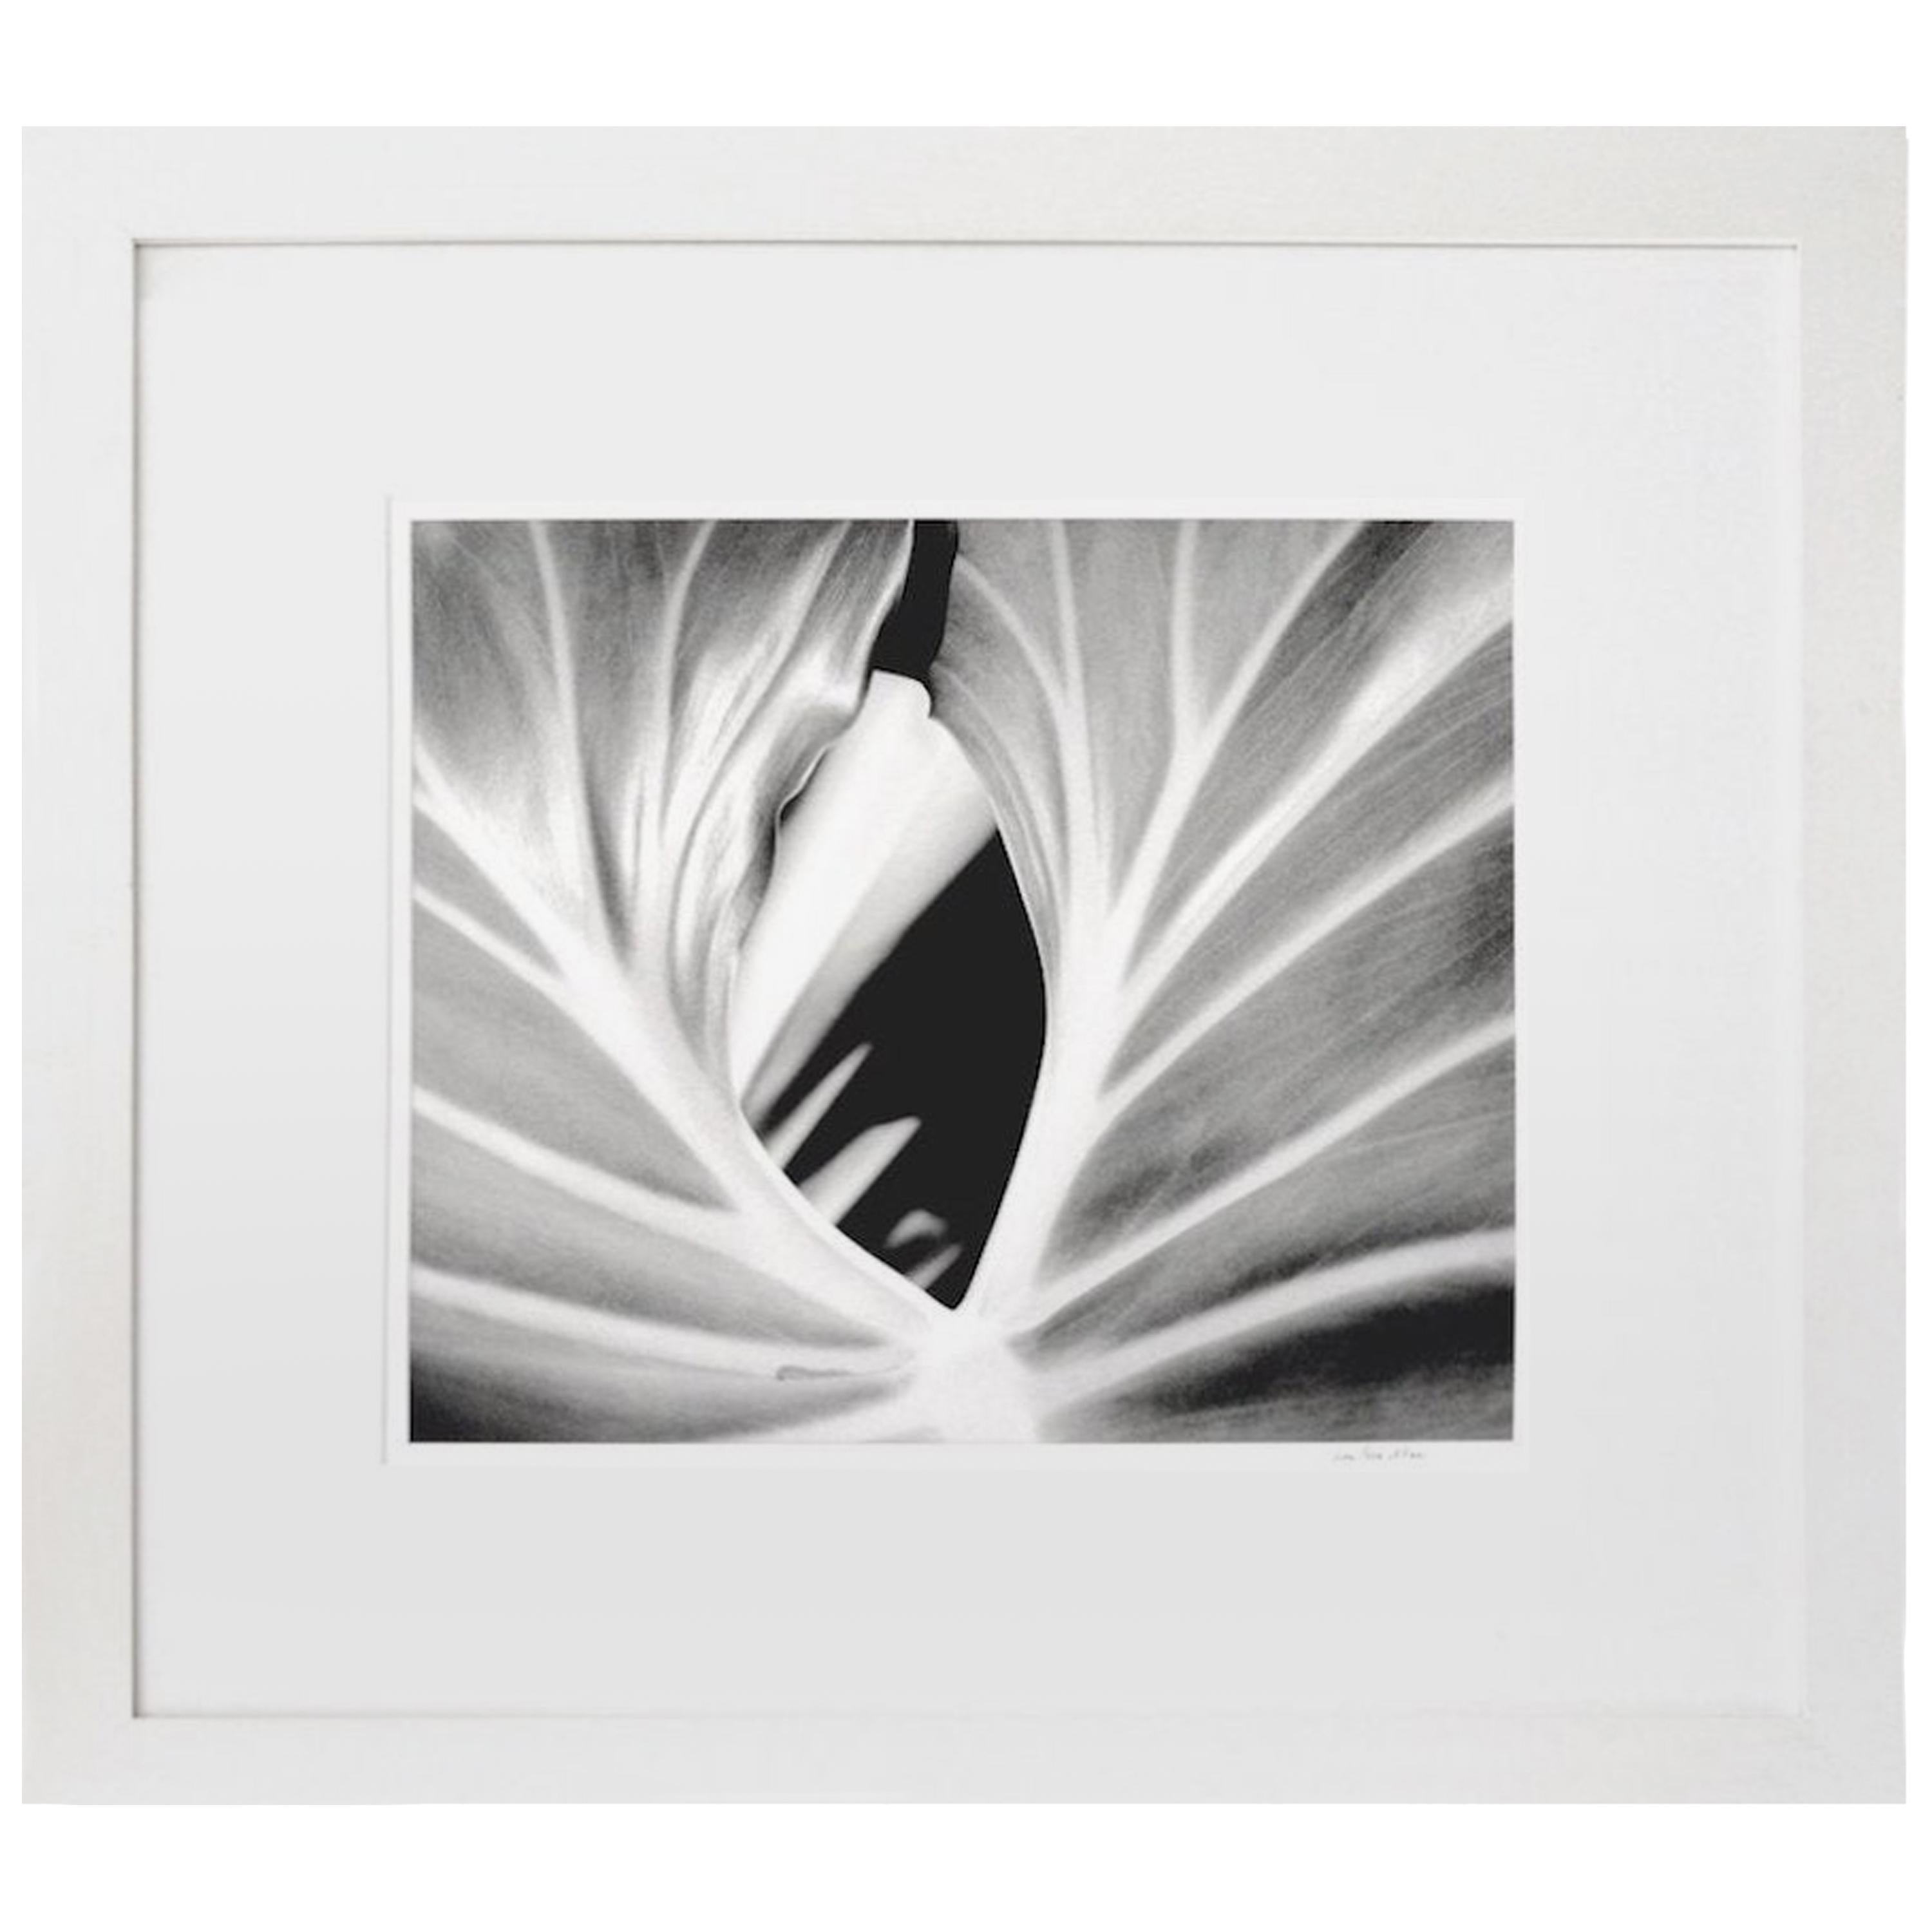 The Leaf by Iran Issa-Khan
Black and white archival pigment print
Image size: 19 in. H x 23 in. W
Frame size: 36 in. H x 40 in. W x 1 in D
Dated and signed by the artist
Unique
2000

Born in Tehran and raised in Europe and the United States, Iran,